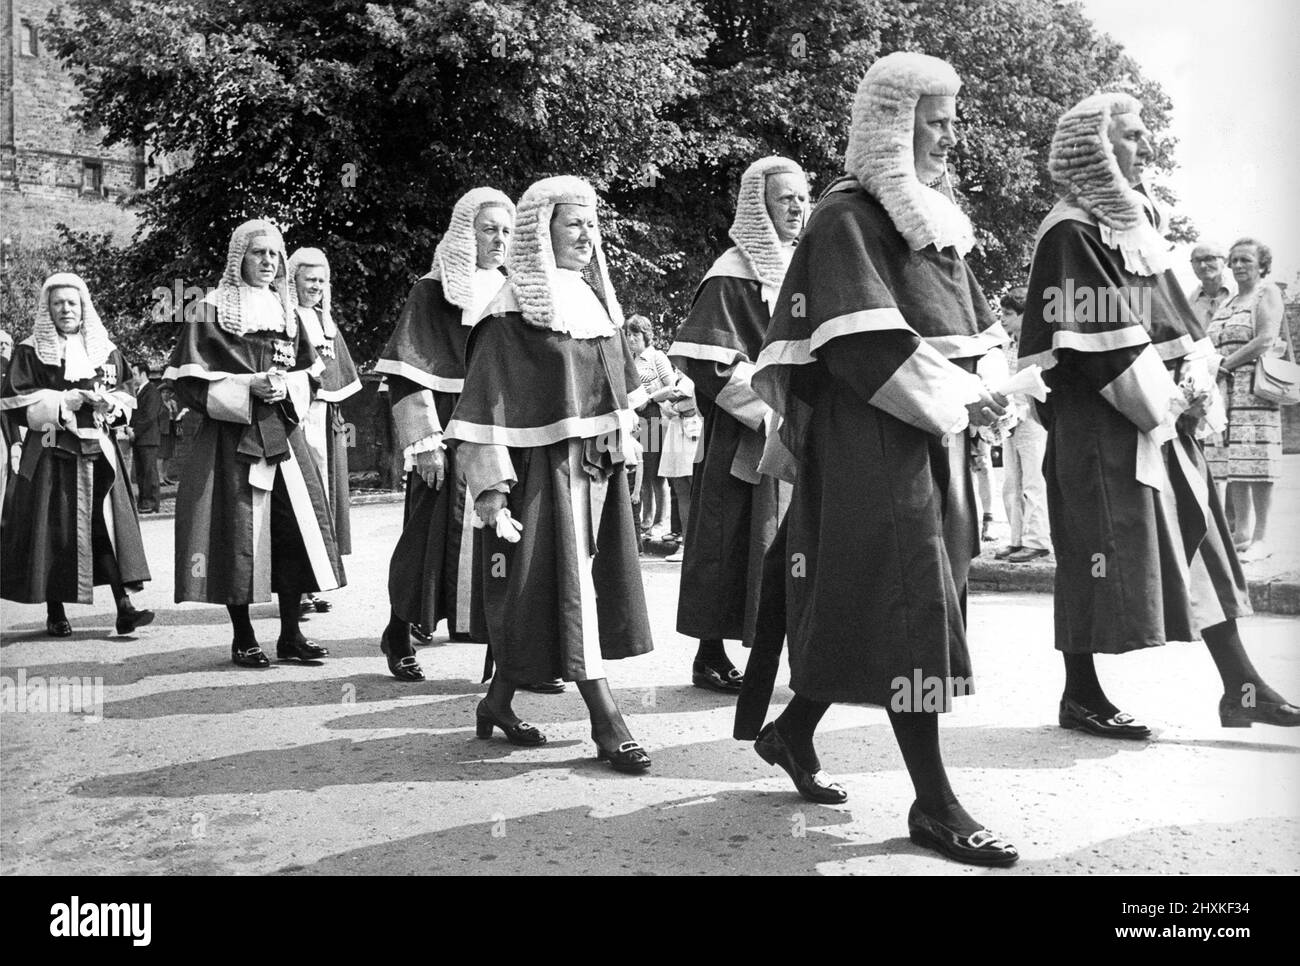 Judges robes Black and White Stock Photos & Images - Alamy